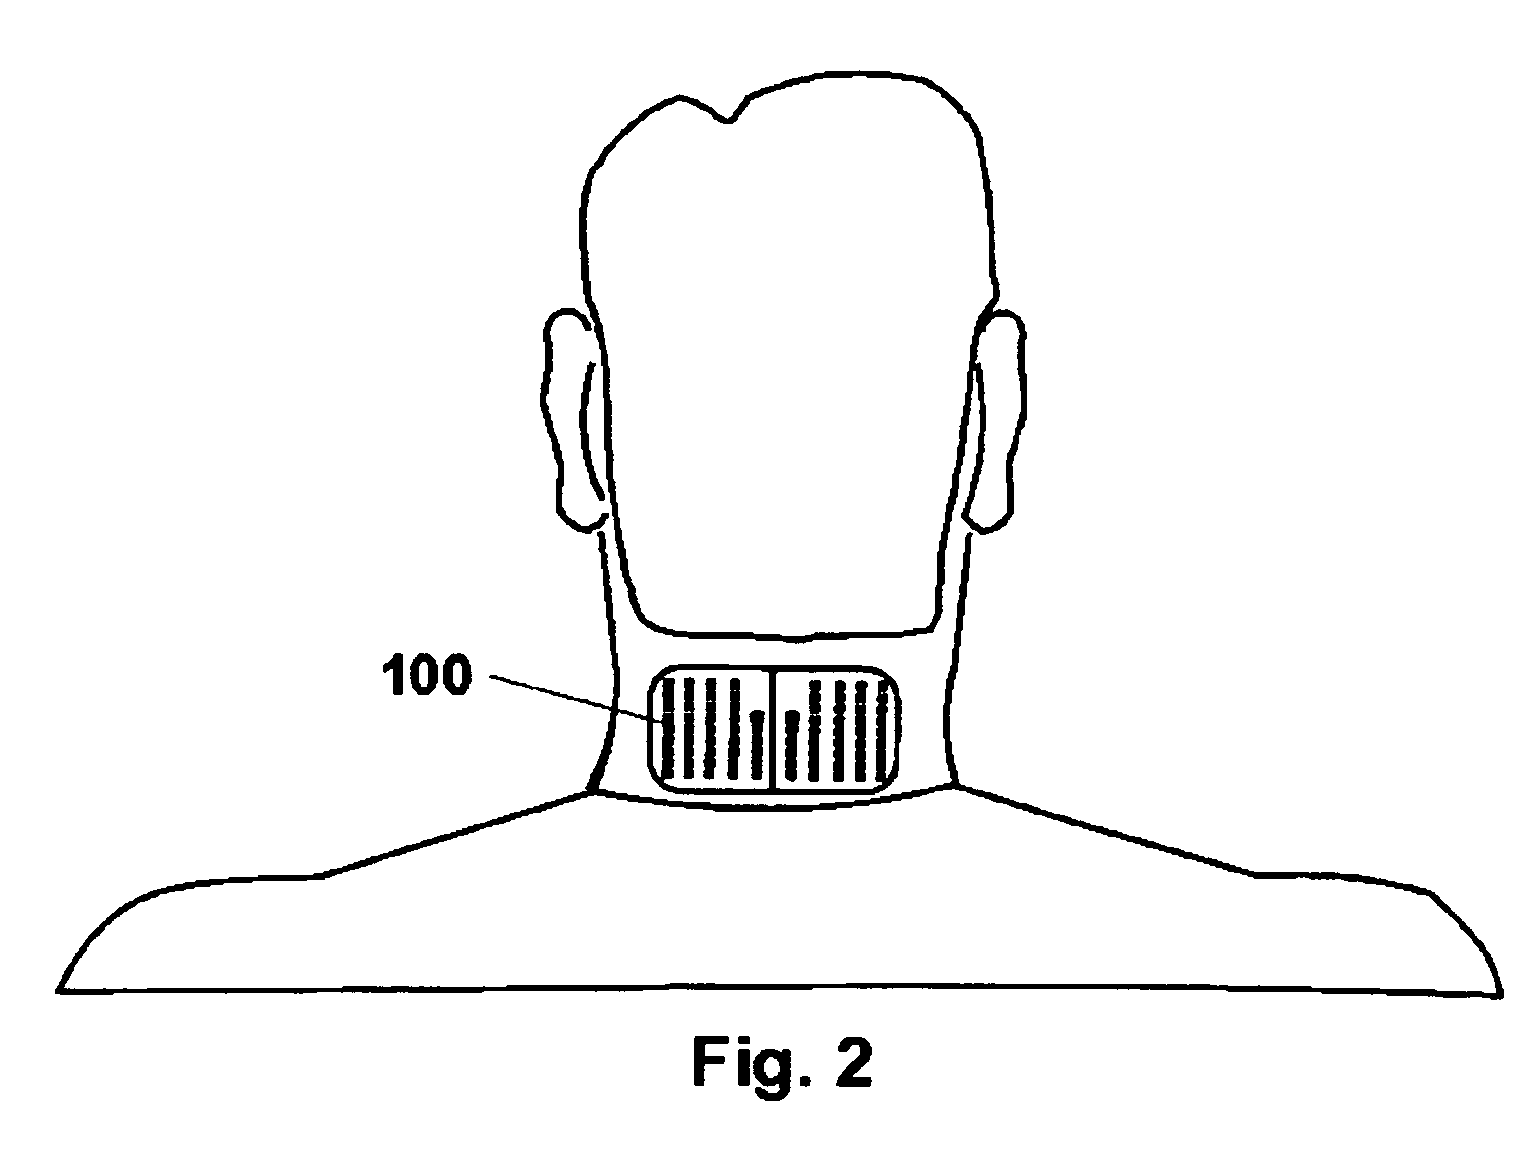 Intelligent assisted control of living bodies